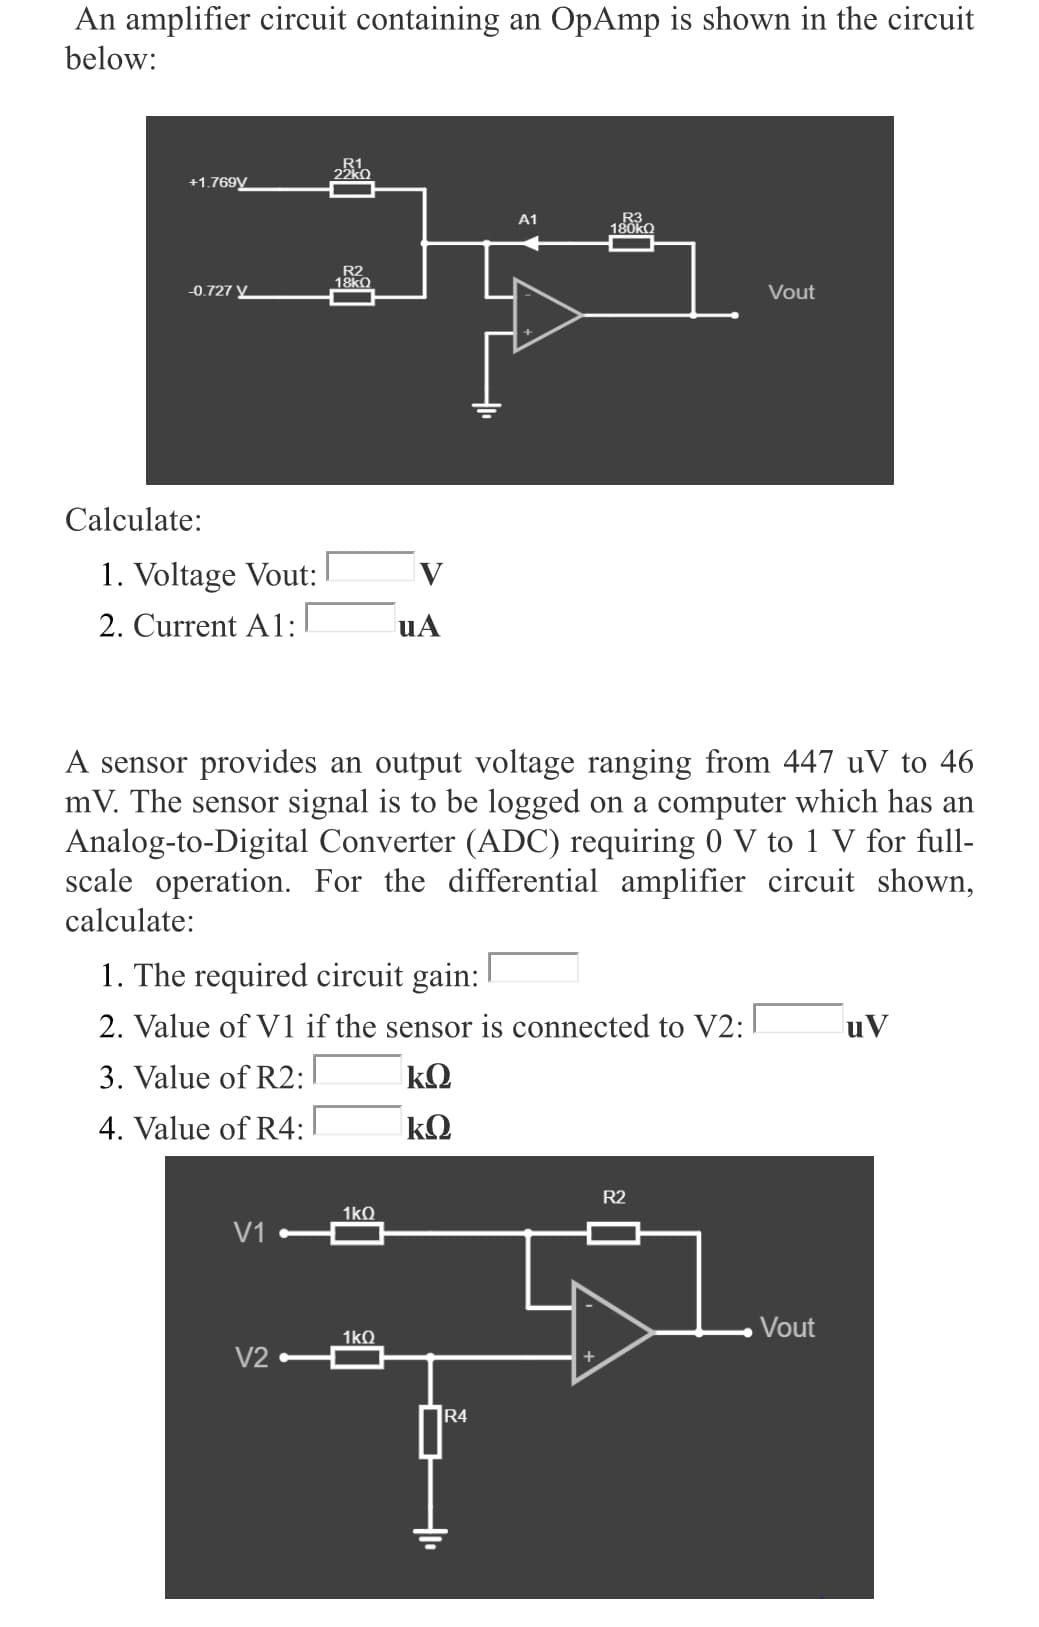 An amplifier circuit containing an OpAmp is shown in the circuit
below:
R1
22kO
+1.769V
R3
180KQ
A1
R2
18KO
-0.727 V_
Vout
Calculate:
1. Voltage Vout:
2. Current A1:
uA
A sensor provides an output voltage ranging from 447 uV to 46
mV. The sensor signal is to be logged on a computer which has an
Analog-to-Digital Converter (ADC) requiring 0 V to 1 V for full-
scale operation. For the differential amplifier circuit shown,
calculate:
1. The required circuit gain:
2. Value of V1 if the sensor is connected to V2:
uV
3. Value of R2:
kQ
4. Value of R4:
R2
1kQ
V1
Vout
1kQ
V2
R4
